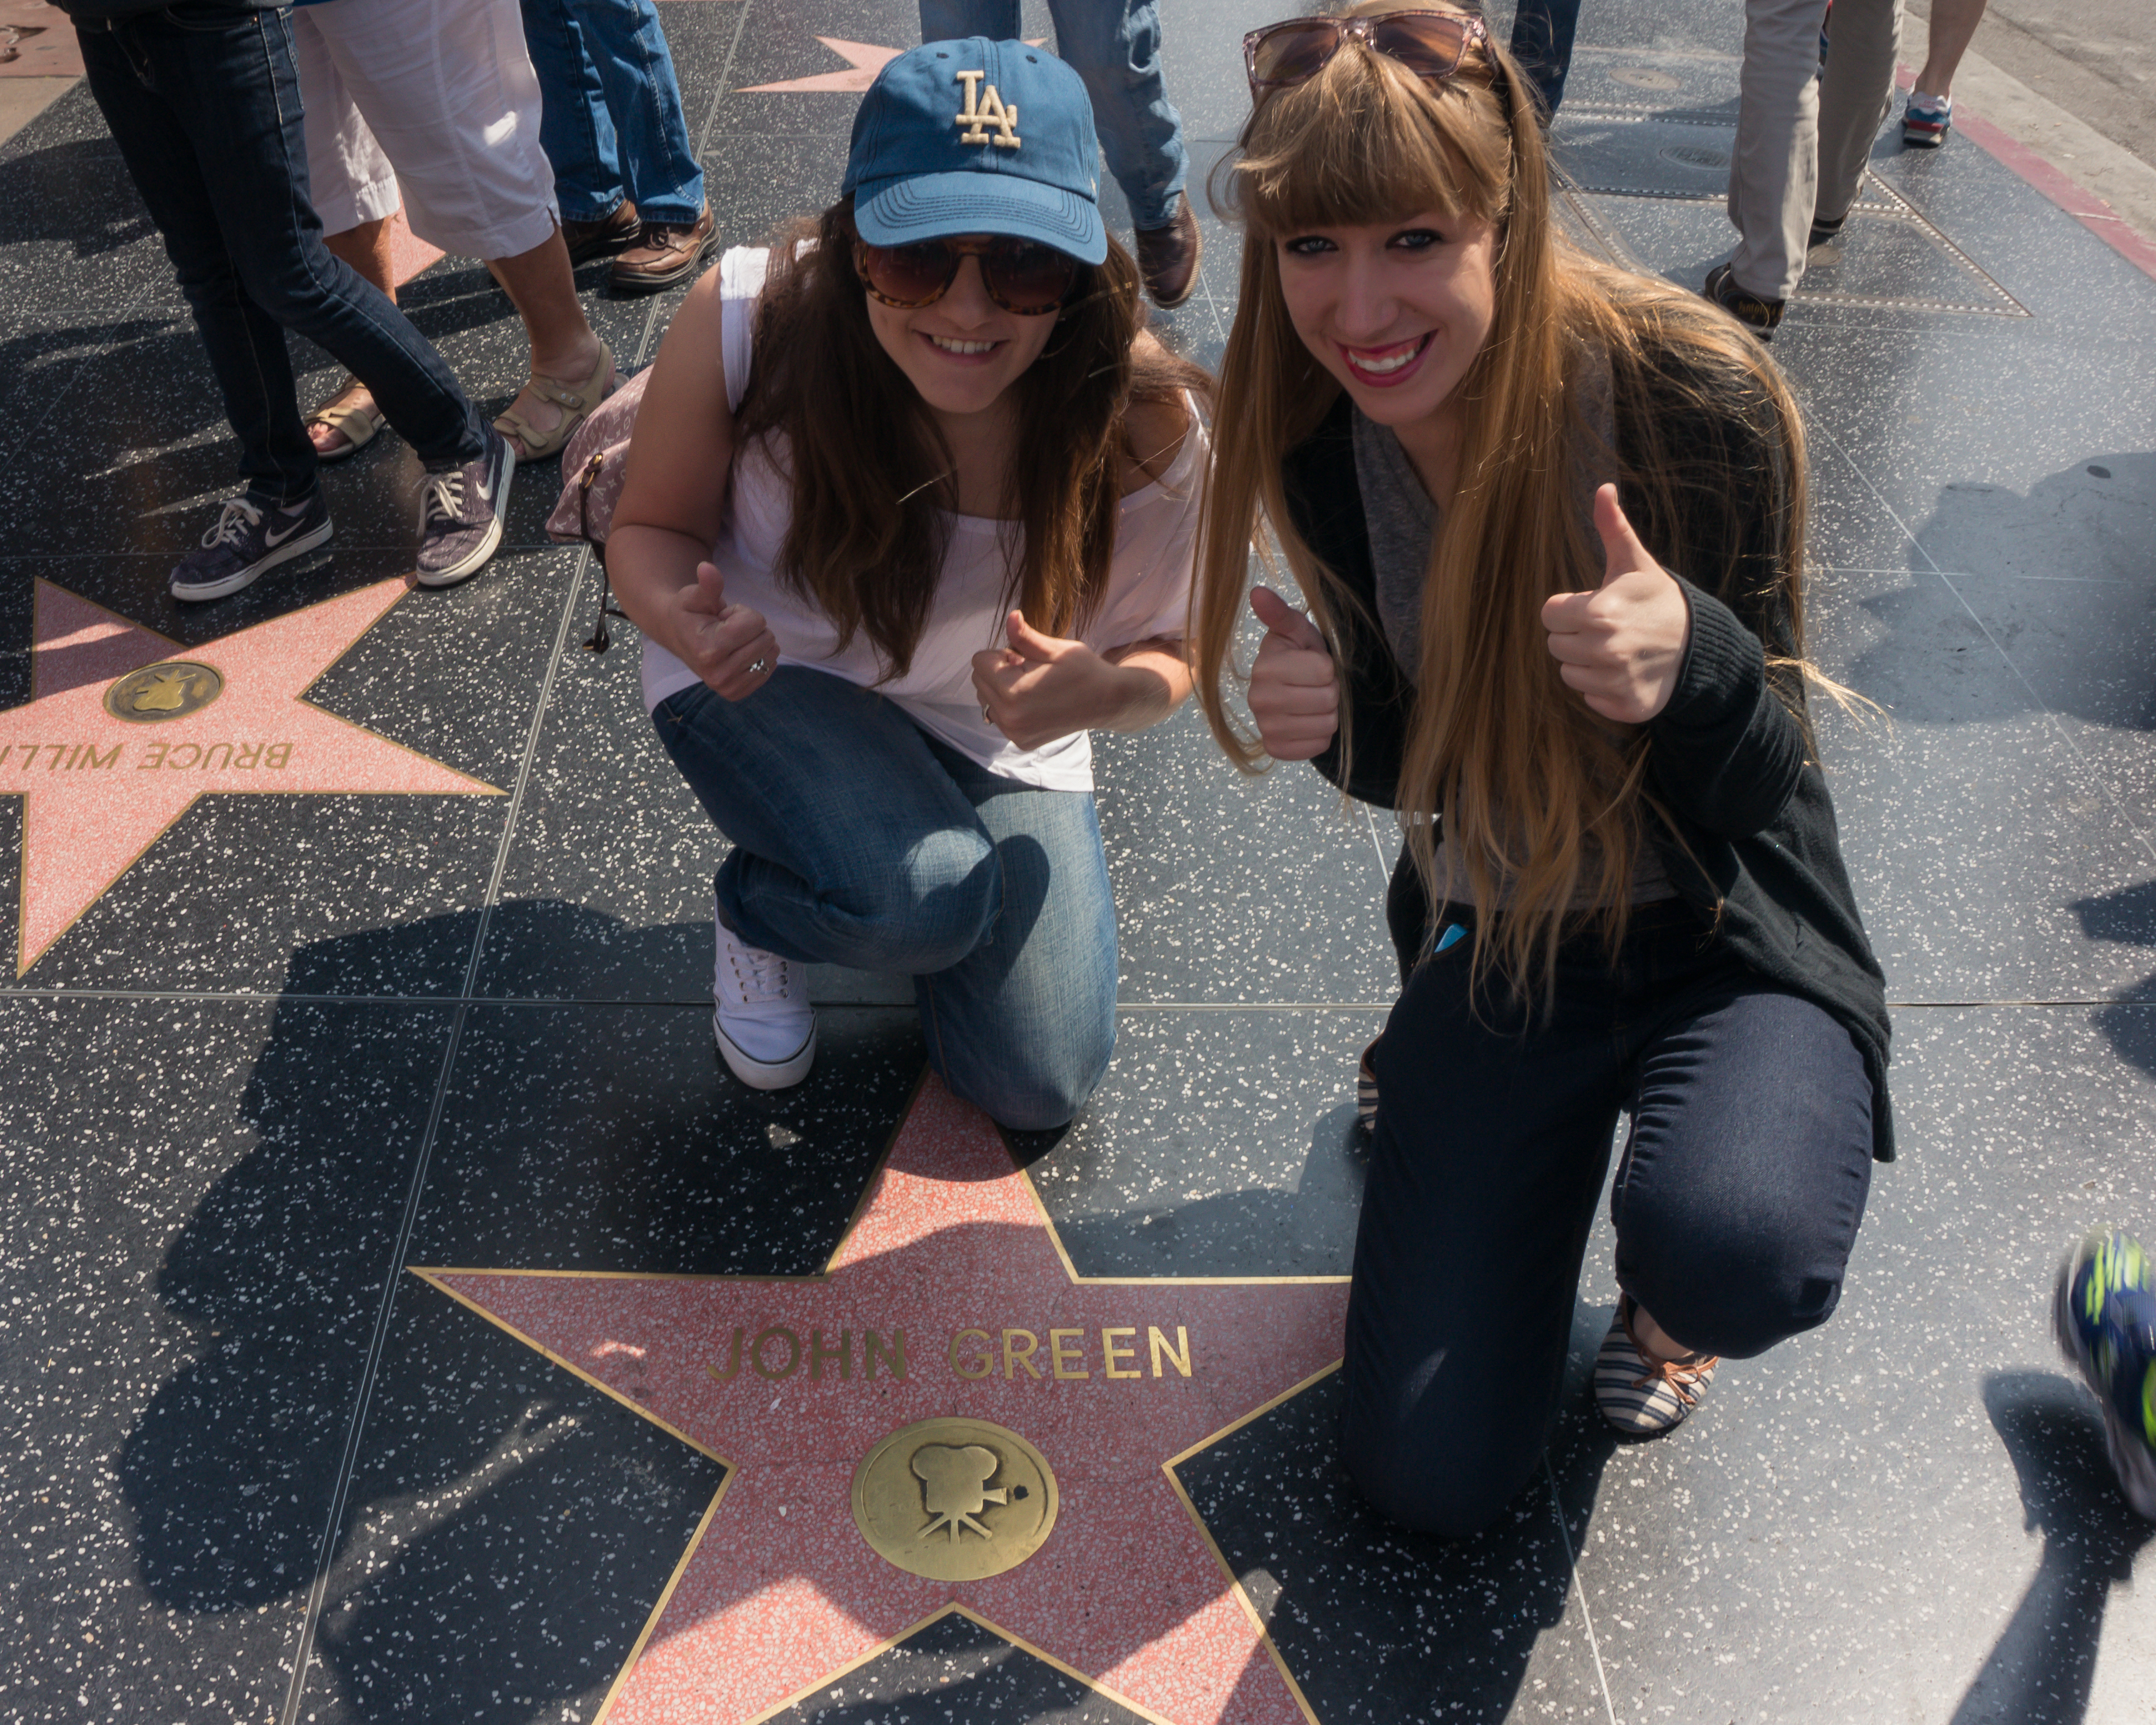 Bailee and friend supporting one of her favorite authors, John Green, on Hollywood Boulevard